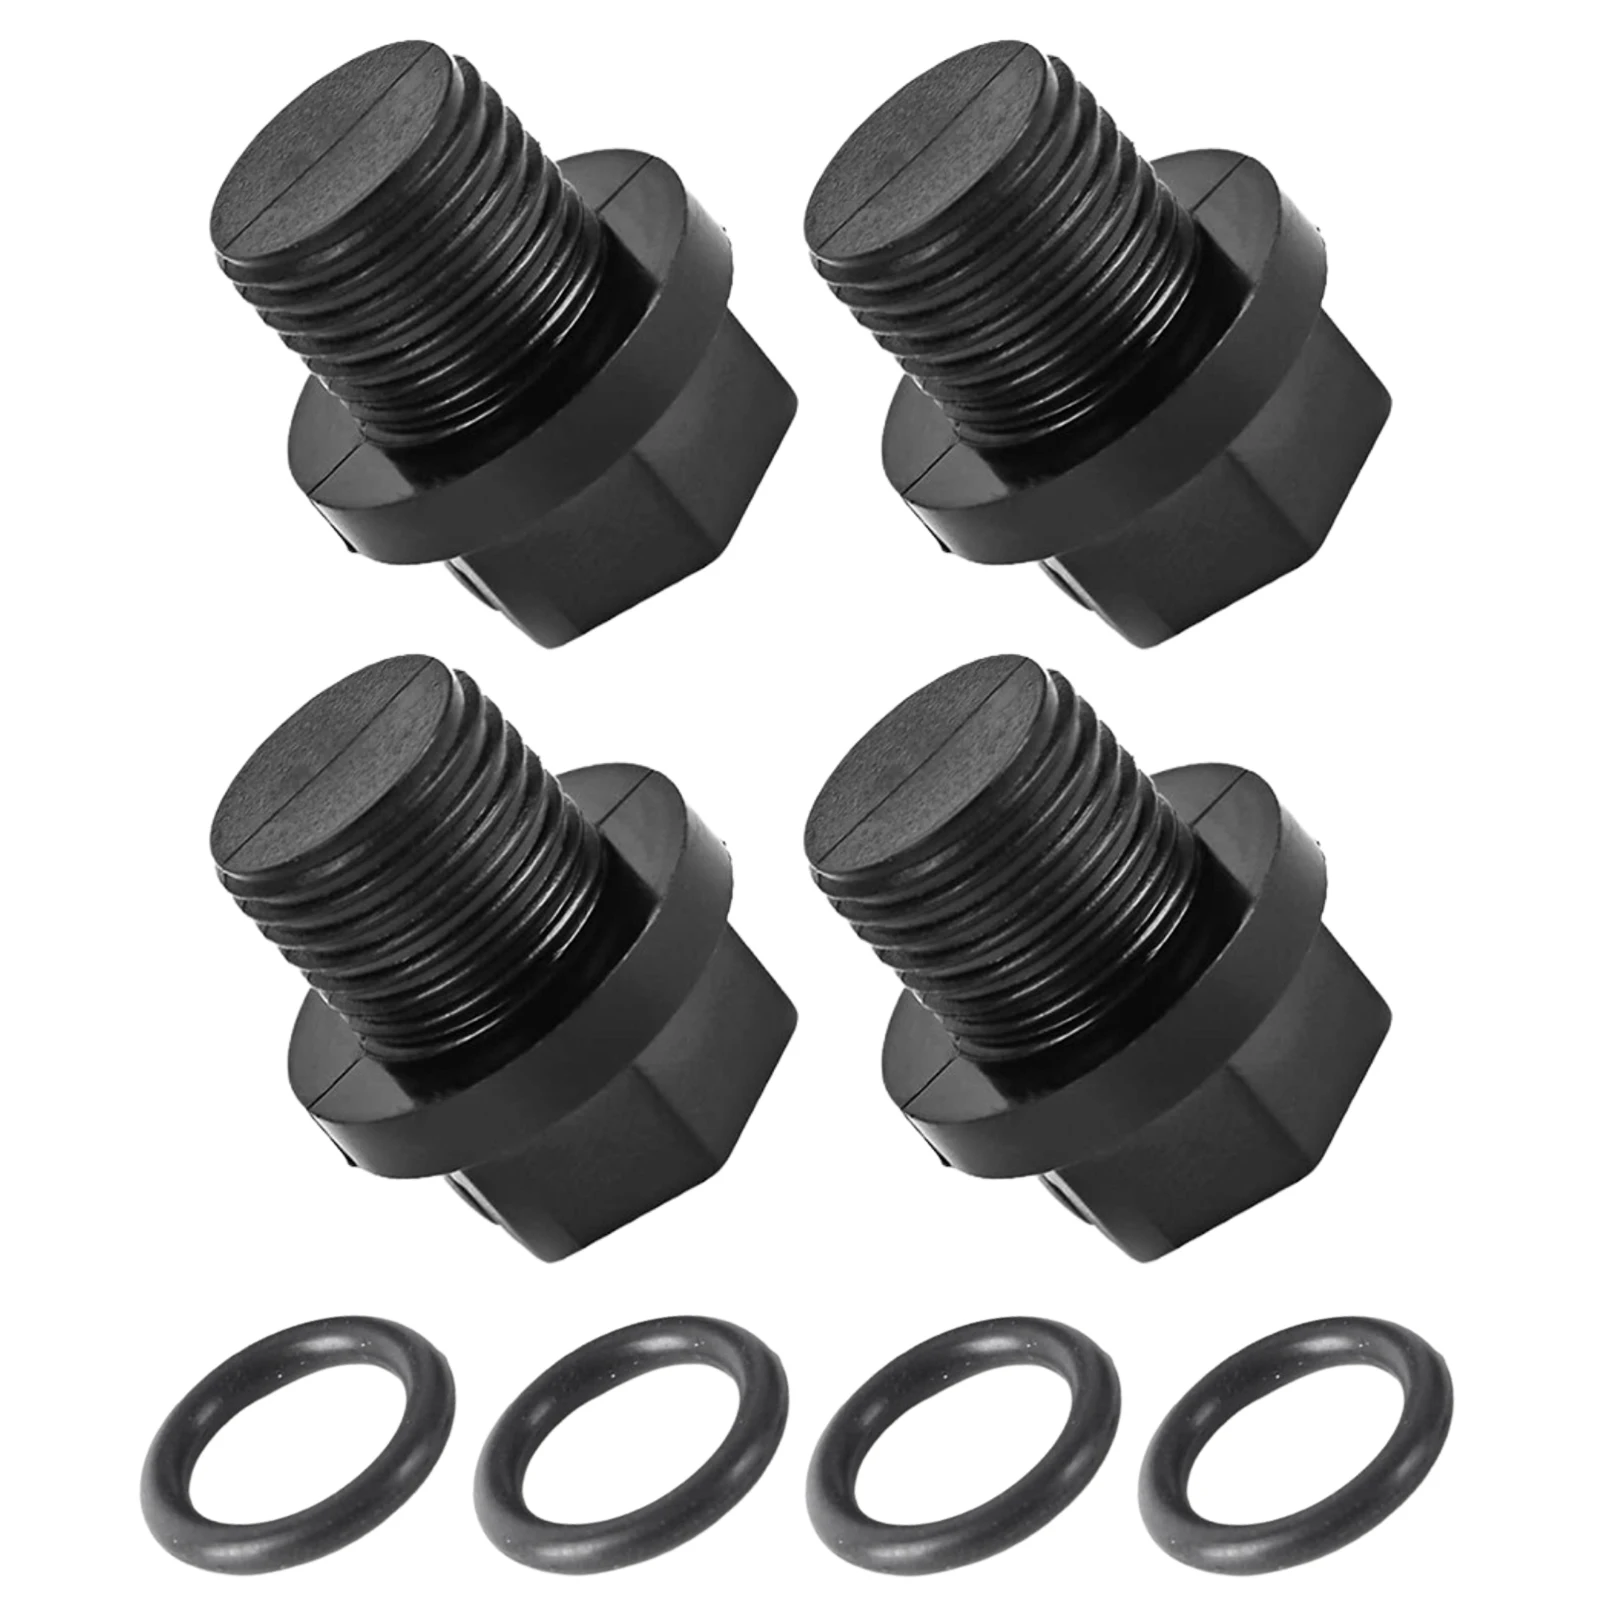 

4 Sets Pool Pump Pipe Plug Gasket O-Ring Replacements & Pipe Plug Compatible With Super Pumps SP2600X5 SP2605X7 SP2607X10 And